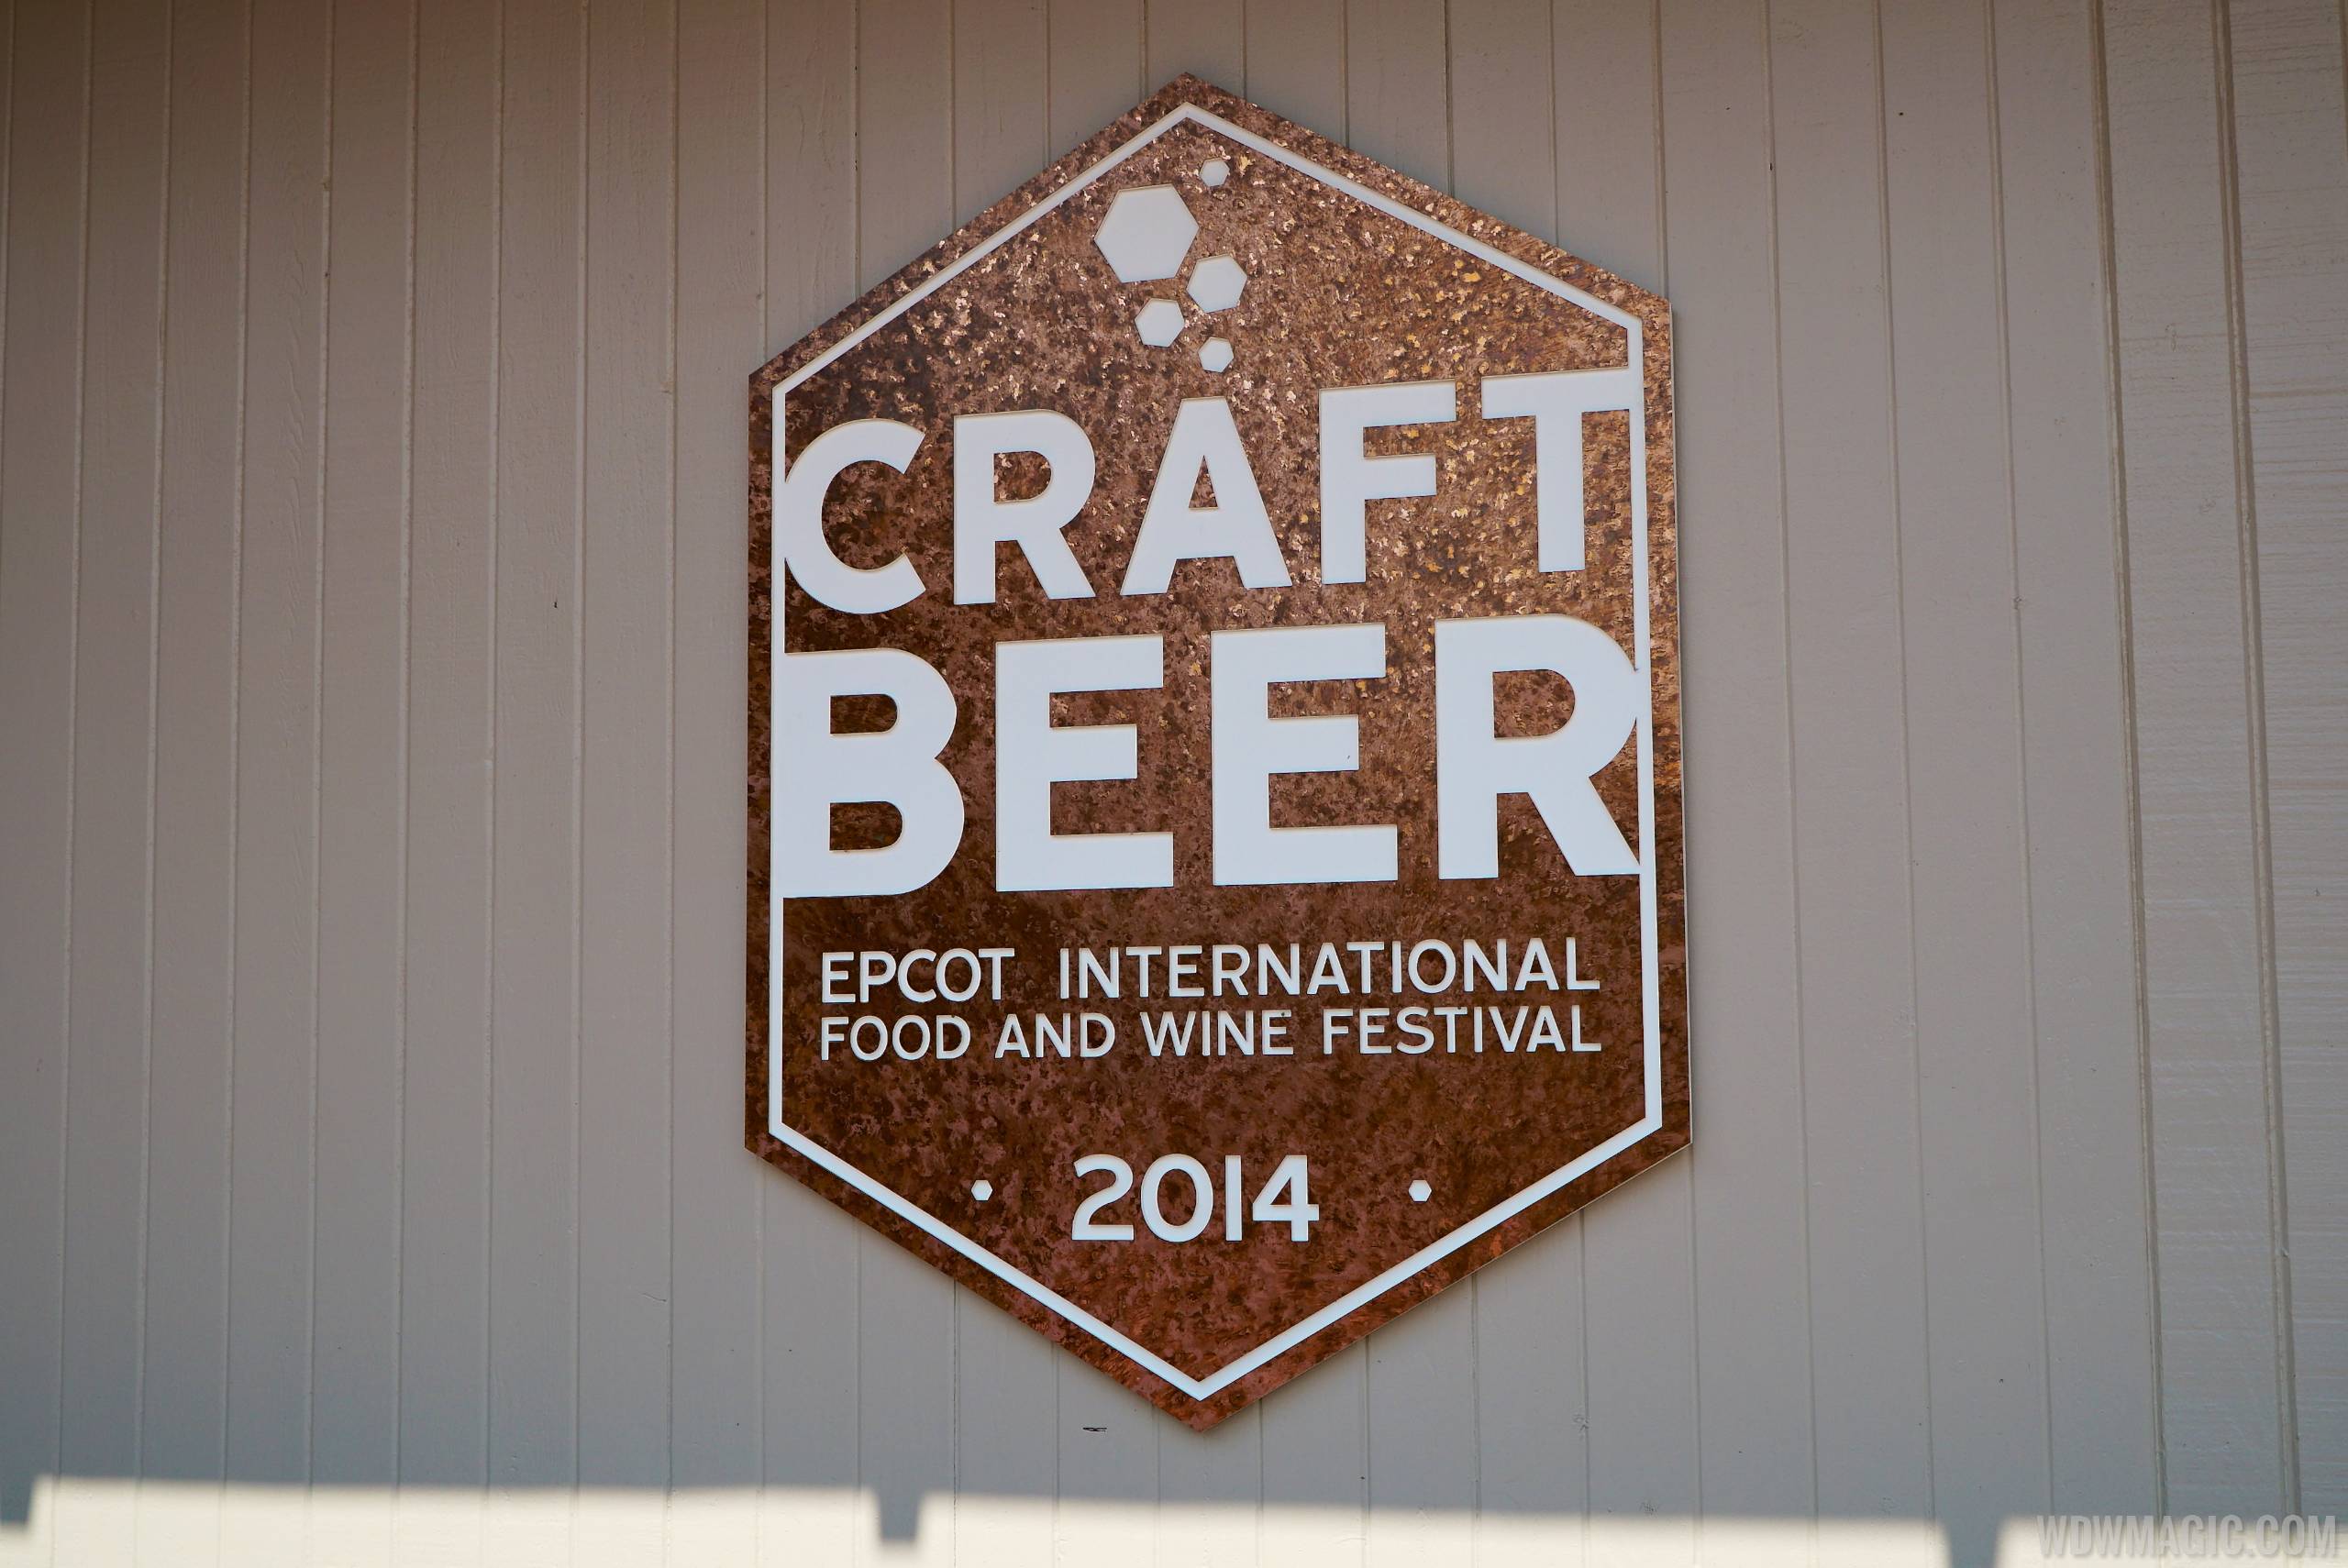 PHOTOS - First look inside the Odyssey Craft Beer center at the Epcot Food and Wine Festival